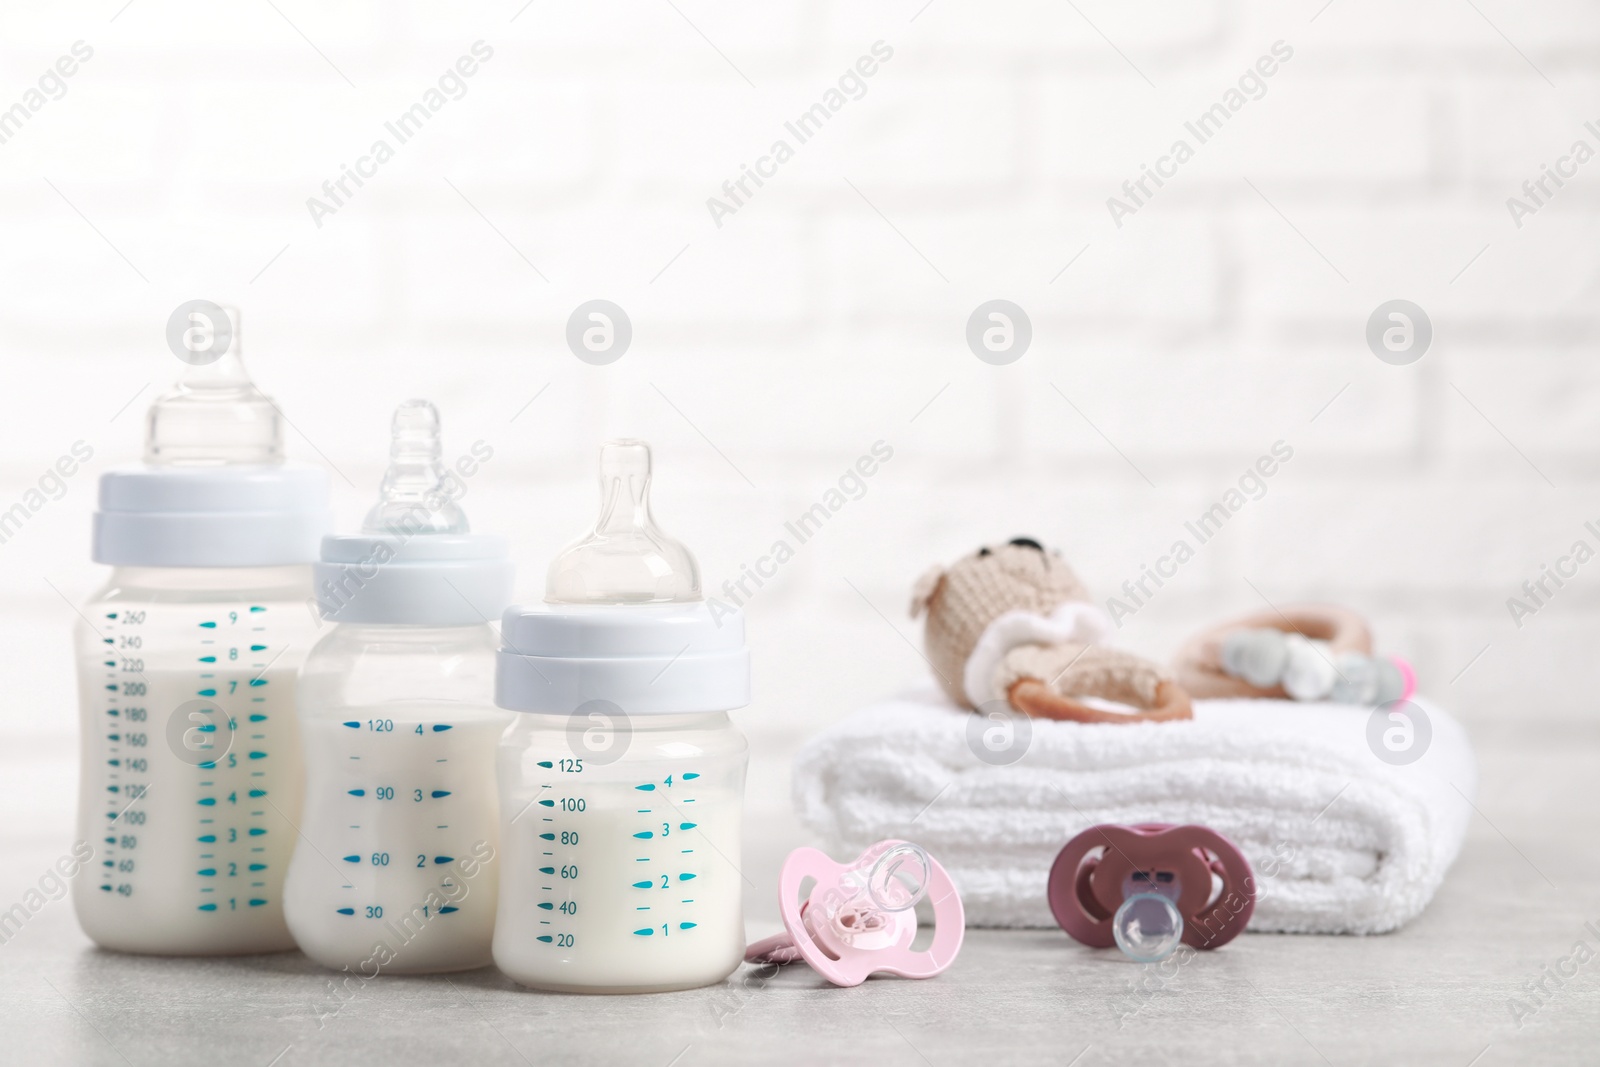 Photo of Feeding bottles with milk, pacifiers, toys and towel on light grey table